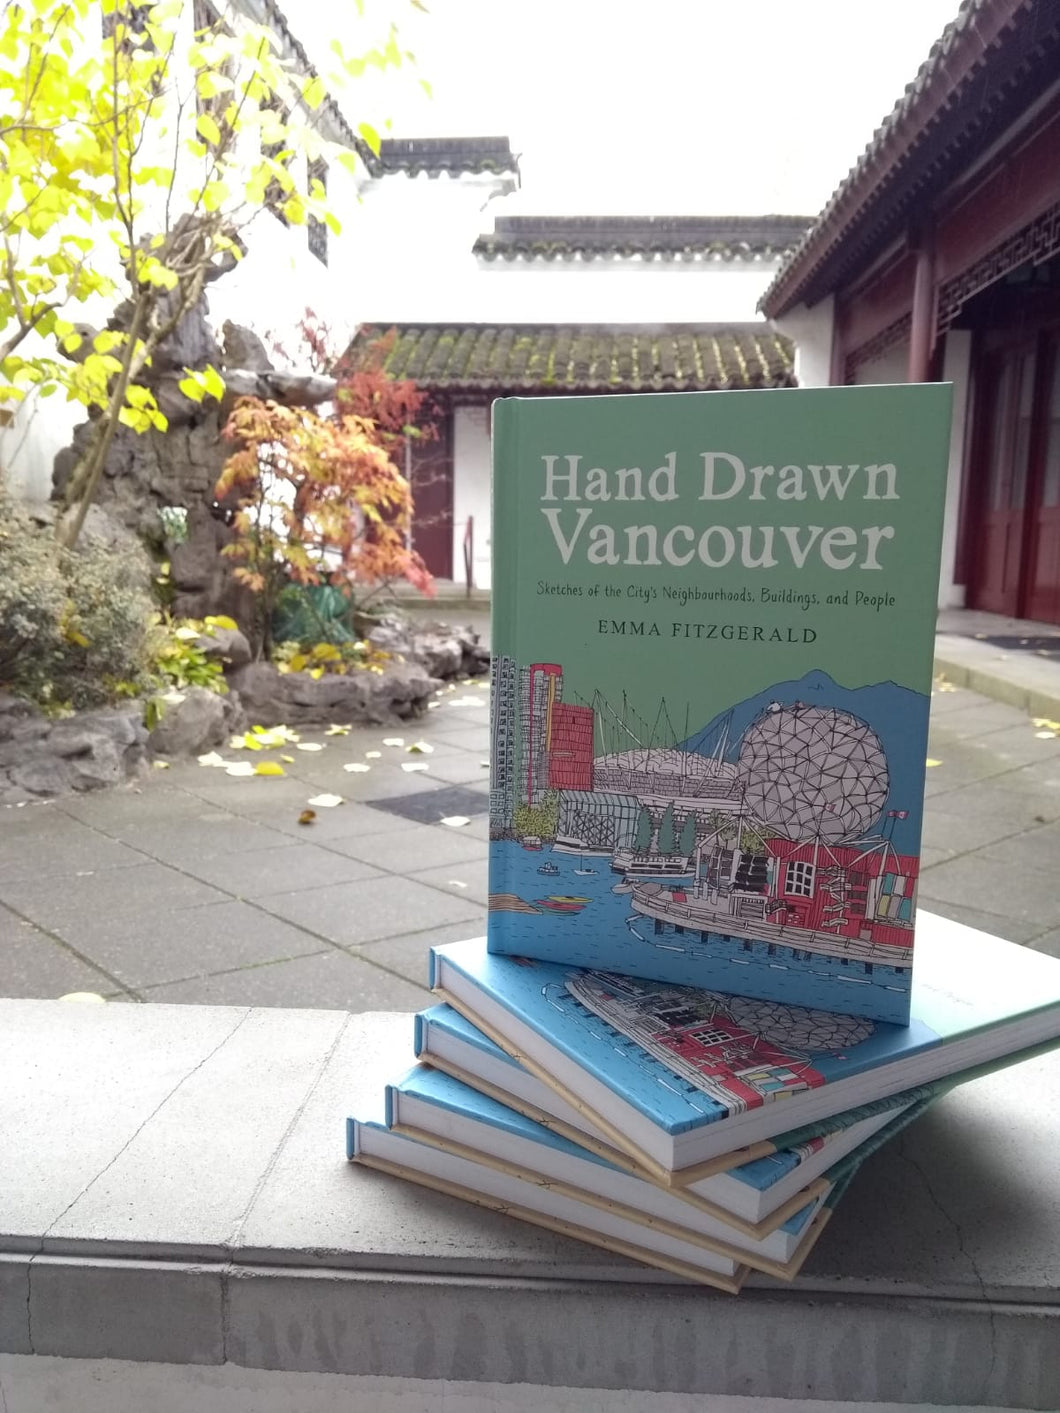 Hand Drawn Vancouver, by Emma Fitzgerald